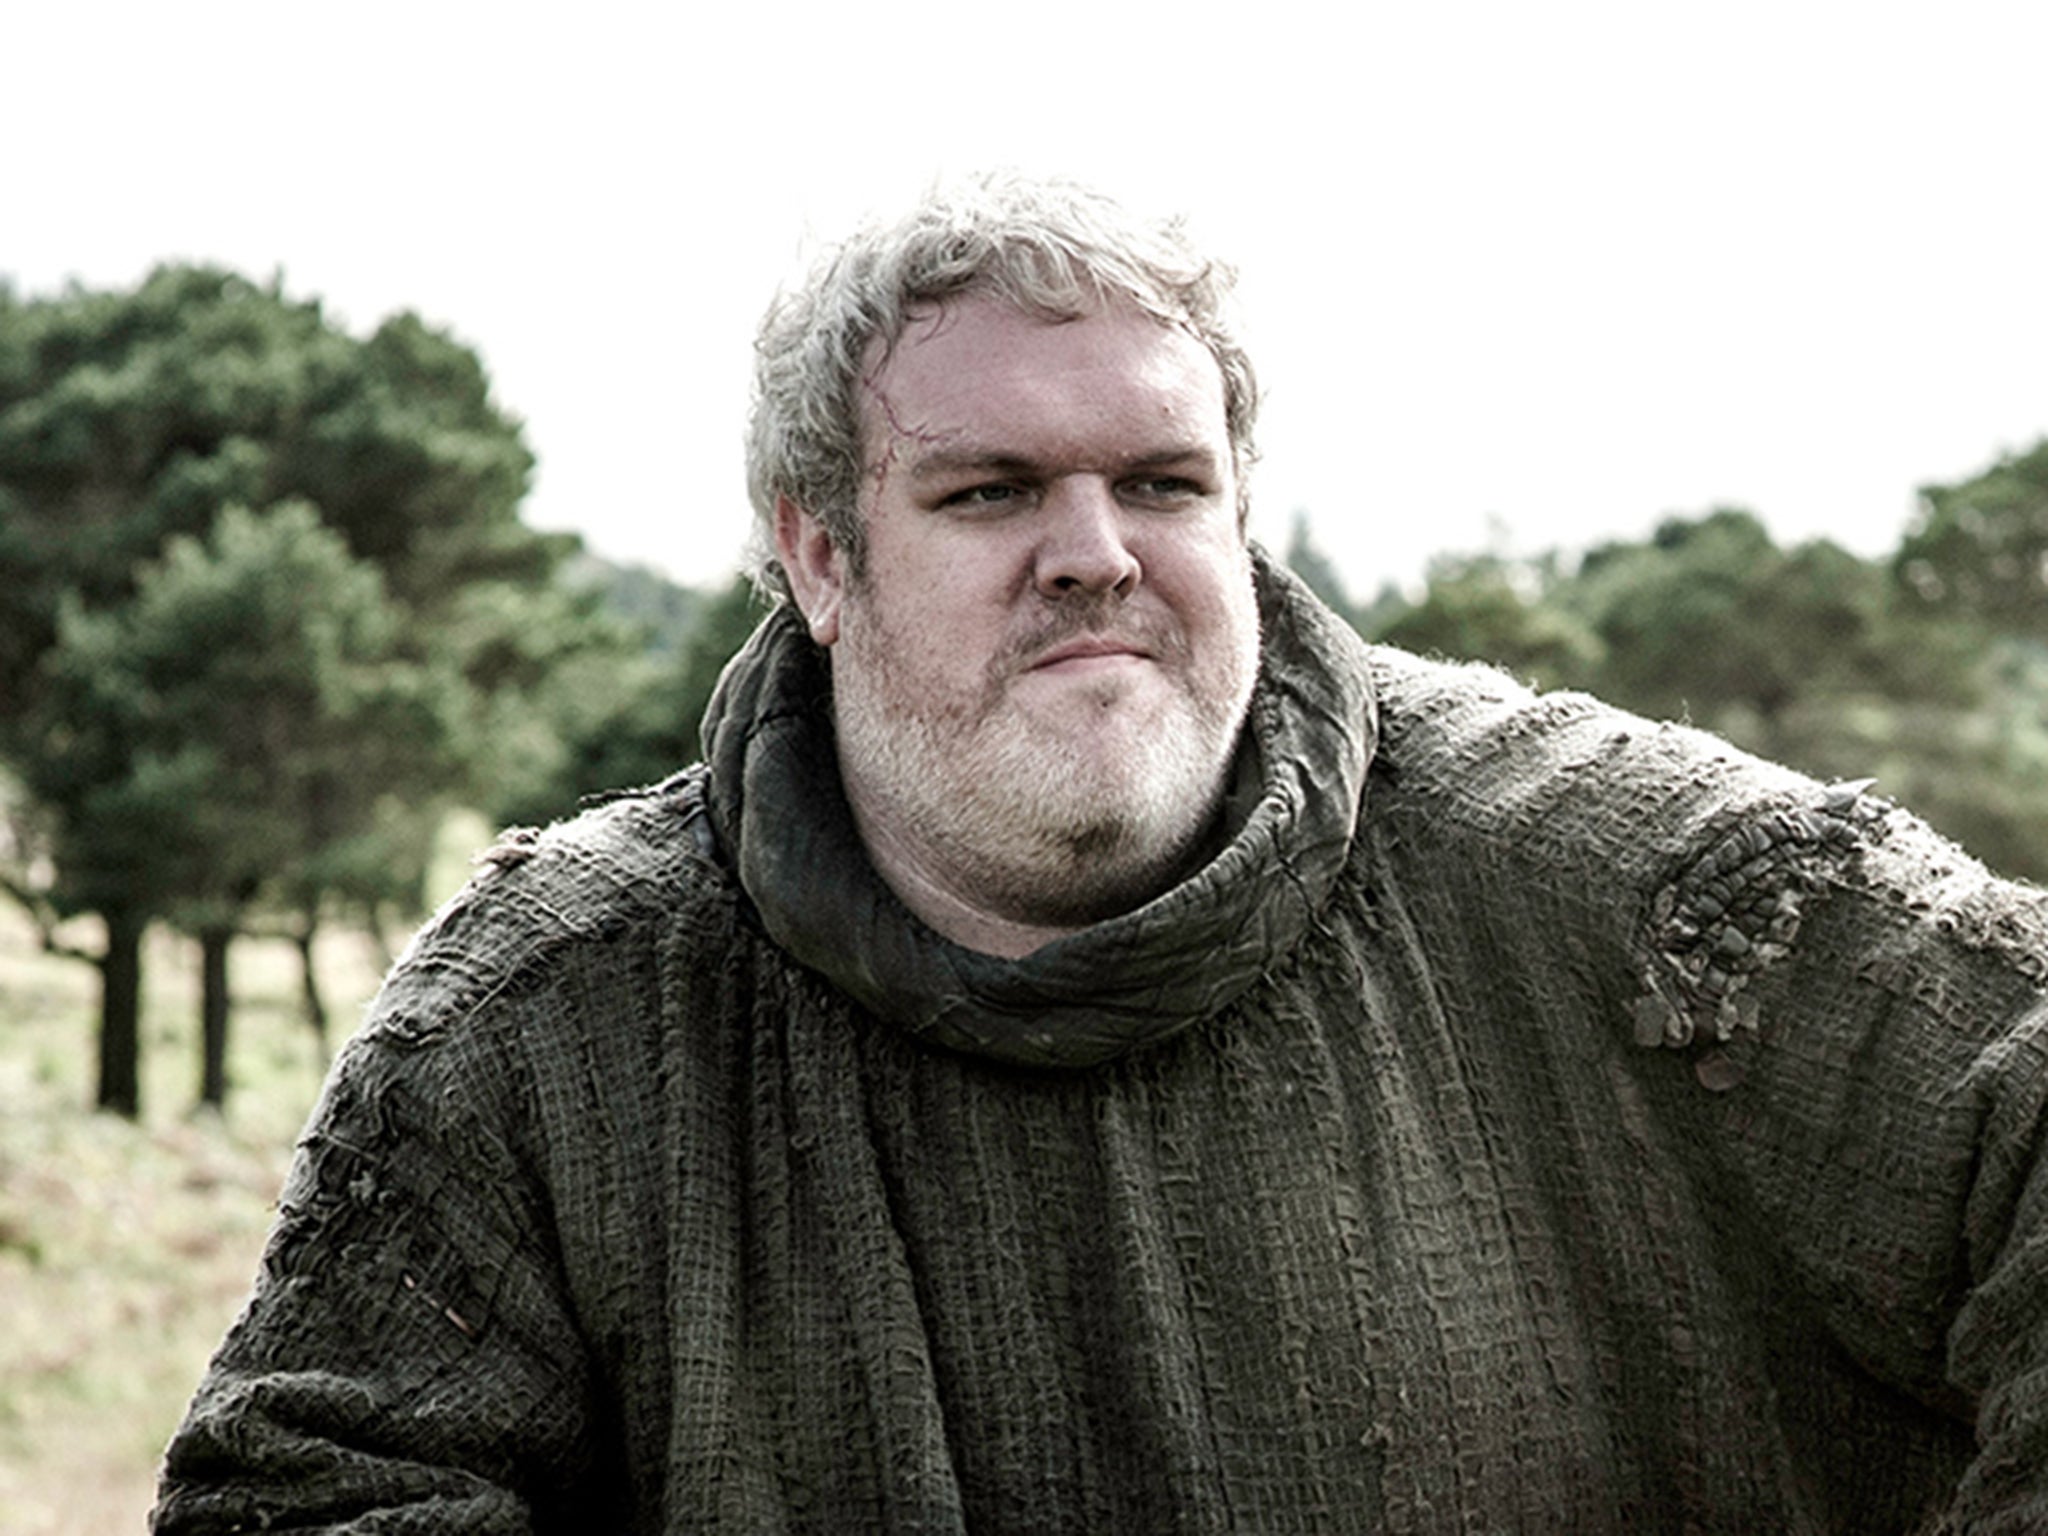 Hodor, a stableboy at Winterfel. Character from the series 'Game of Thrones', played by Kristian Nairn